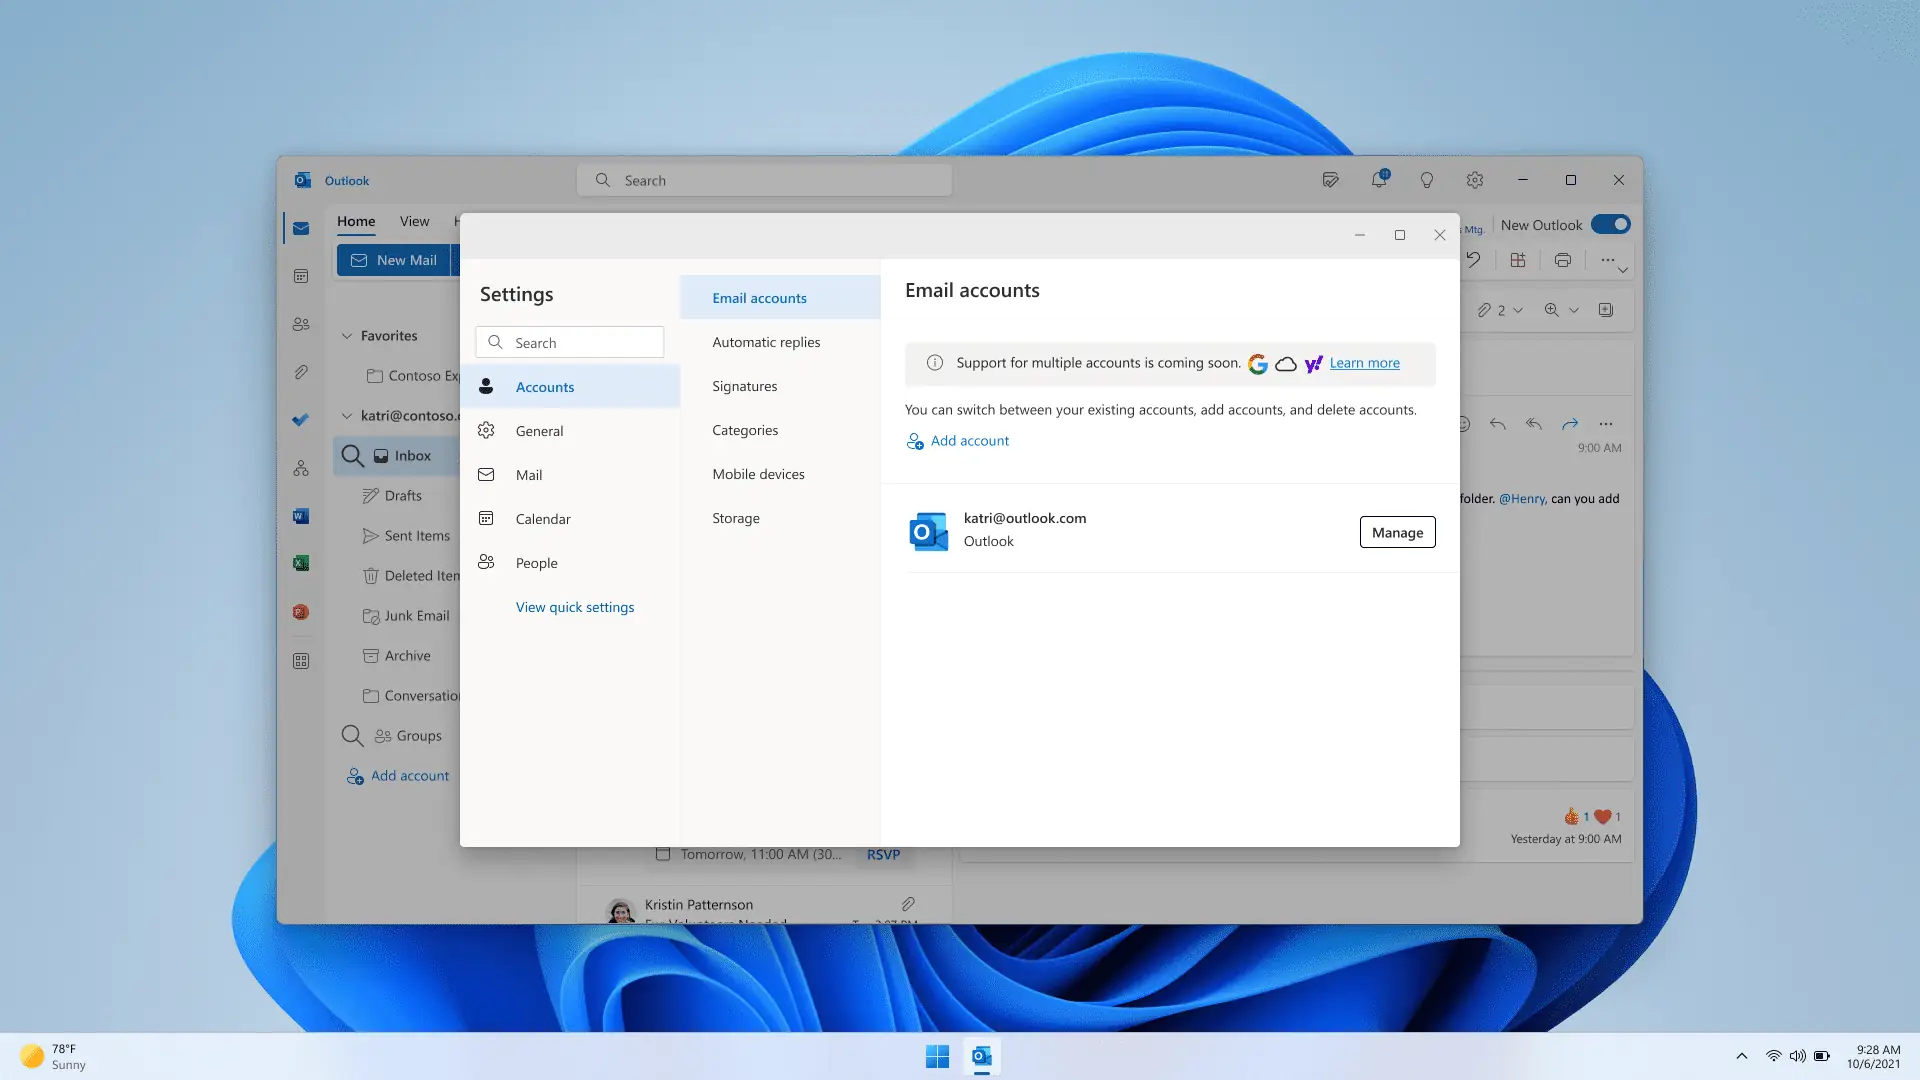 Microsoft’s new unified Outlook app for Windows is now available to all Office Insiders